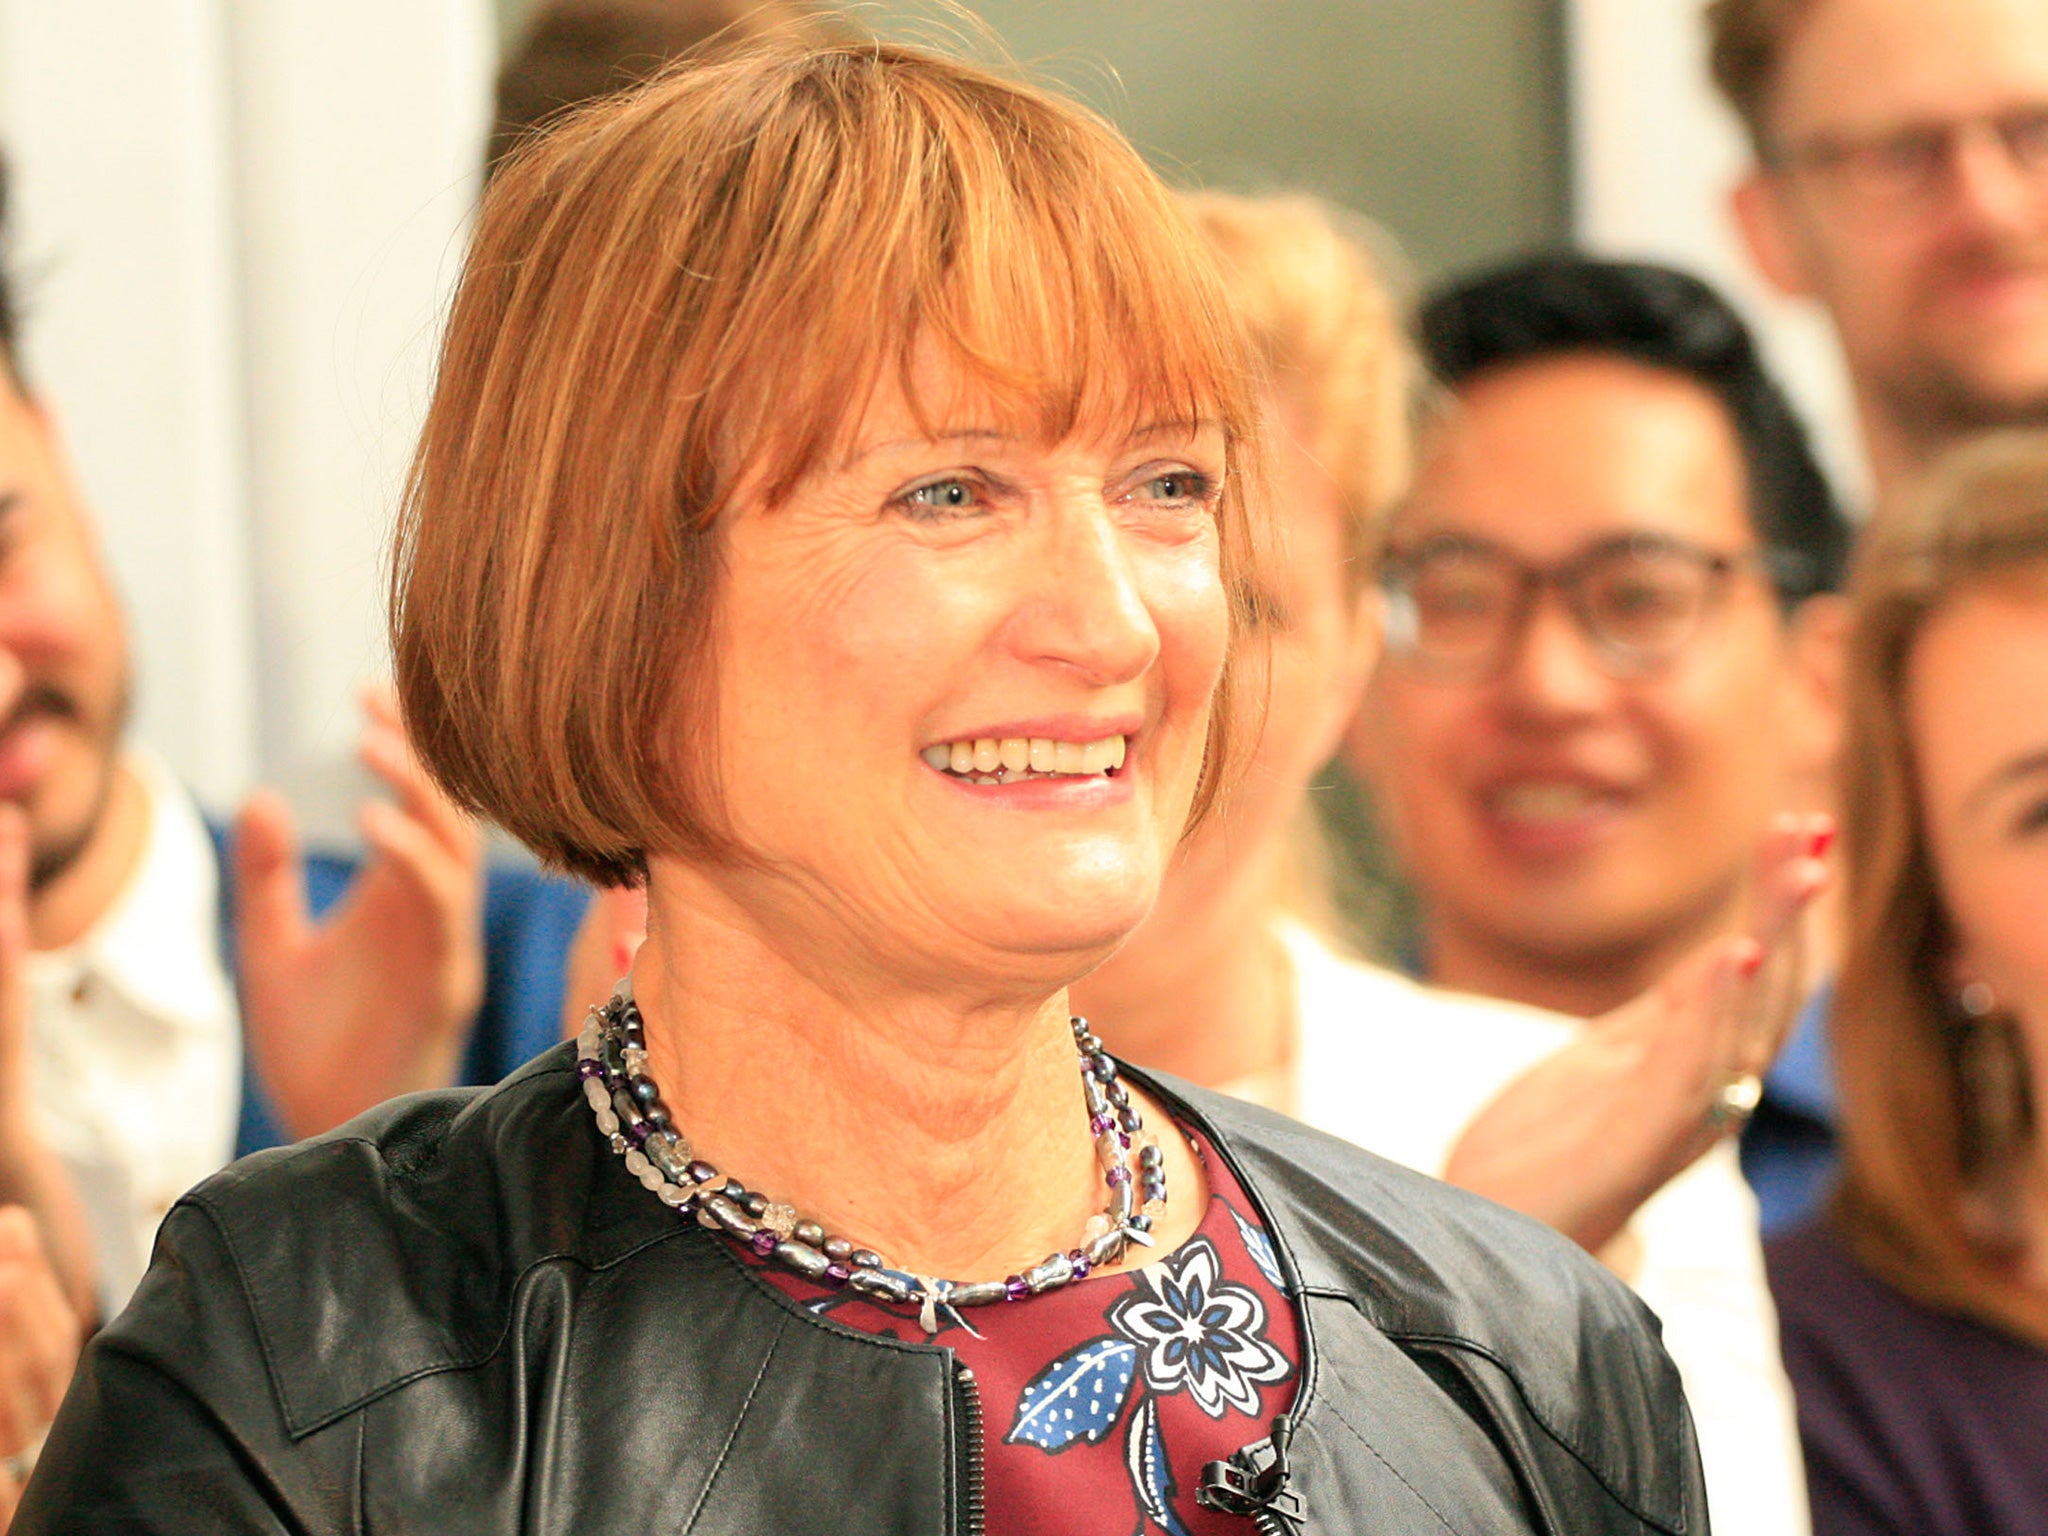 The former MP Tessa Jowell unveils her campaign to be Mayor of London